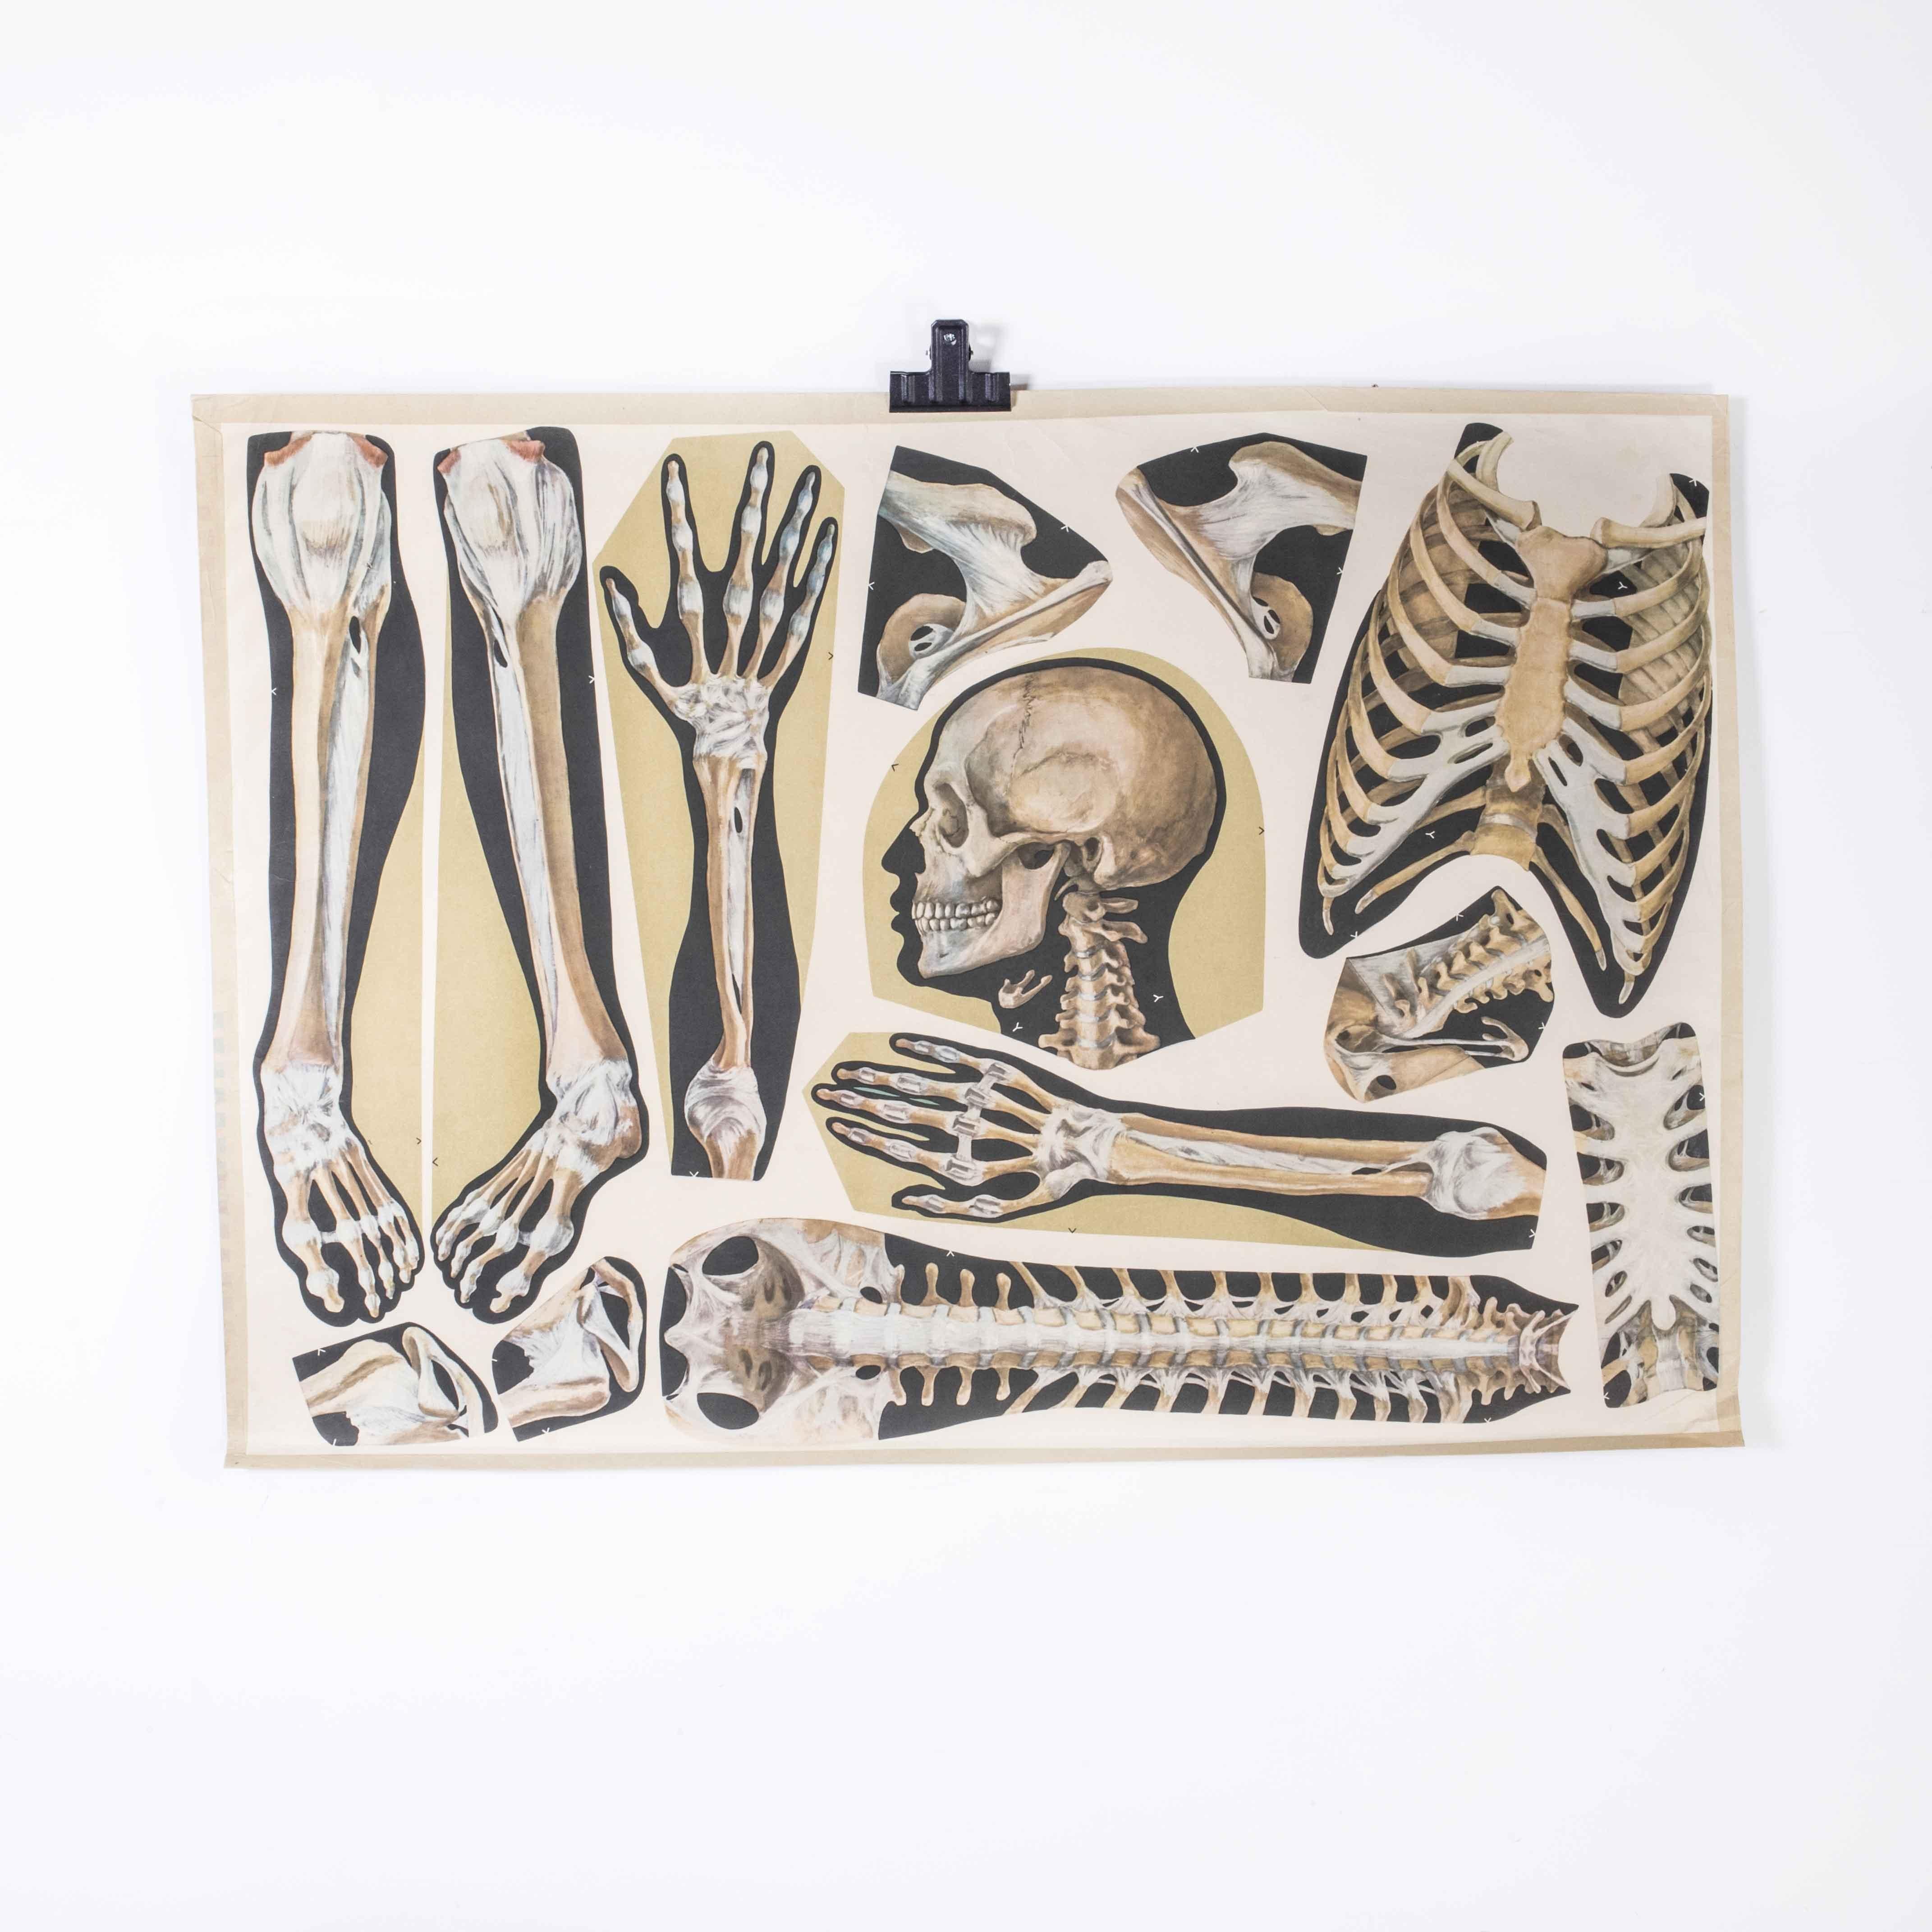 Early 20th Century Human Skeleton Parts Educational Poster
Early 20th Century Human Skeleton Parts Educational Poster. Early 20th century Czechoslovakian educational human anatomy chart. A rare and vintage wall chart from the Czech Republic